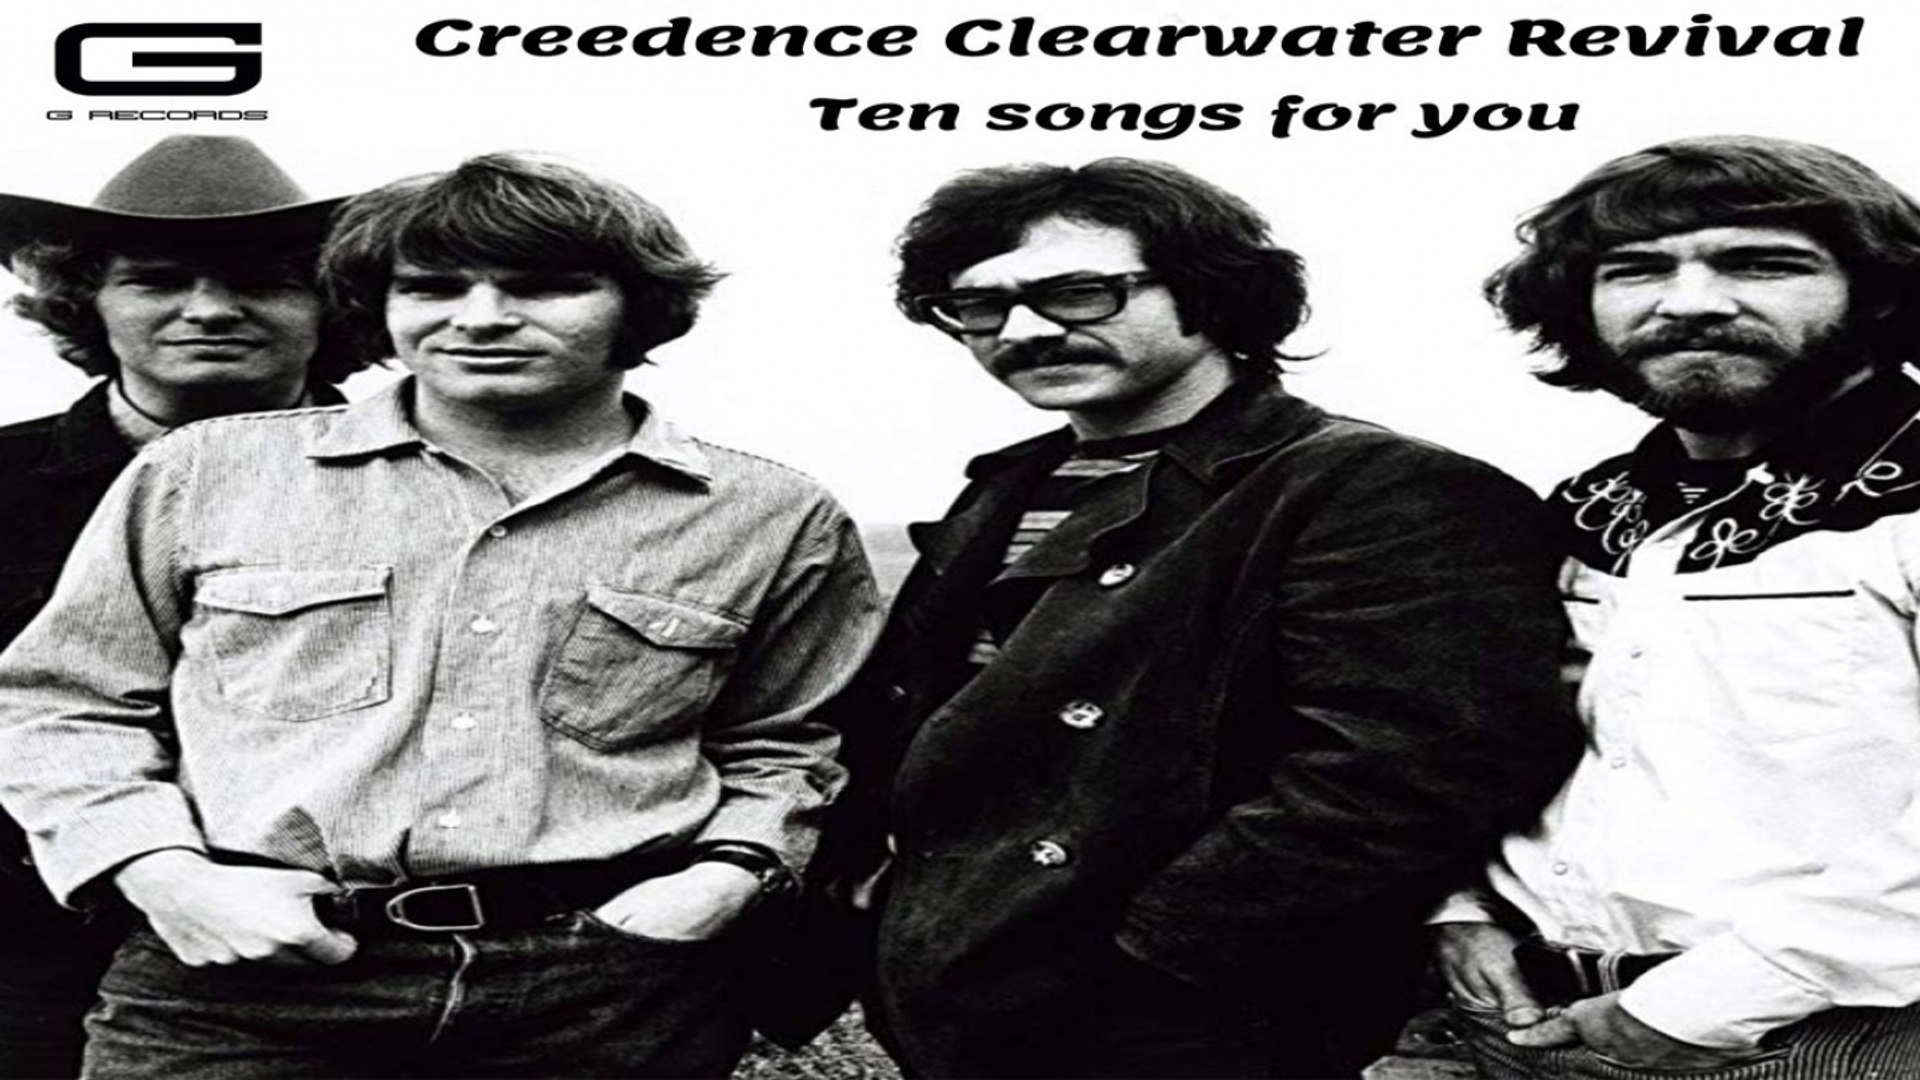 ⁣Creedence Clearwater Revival - Good golly miss molly